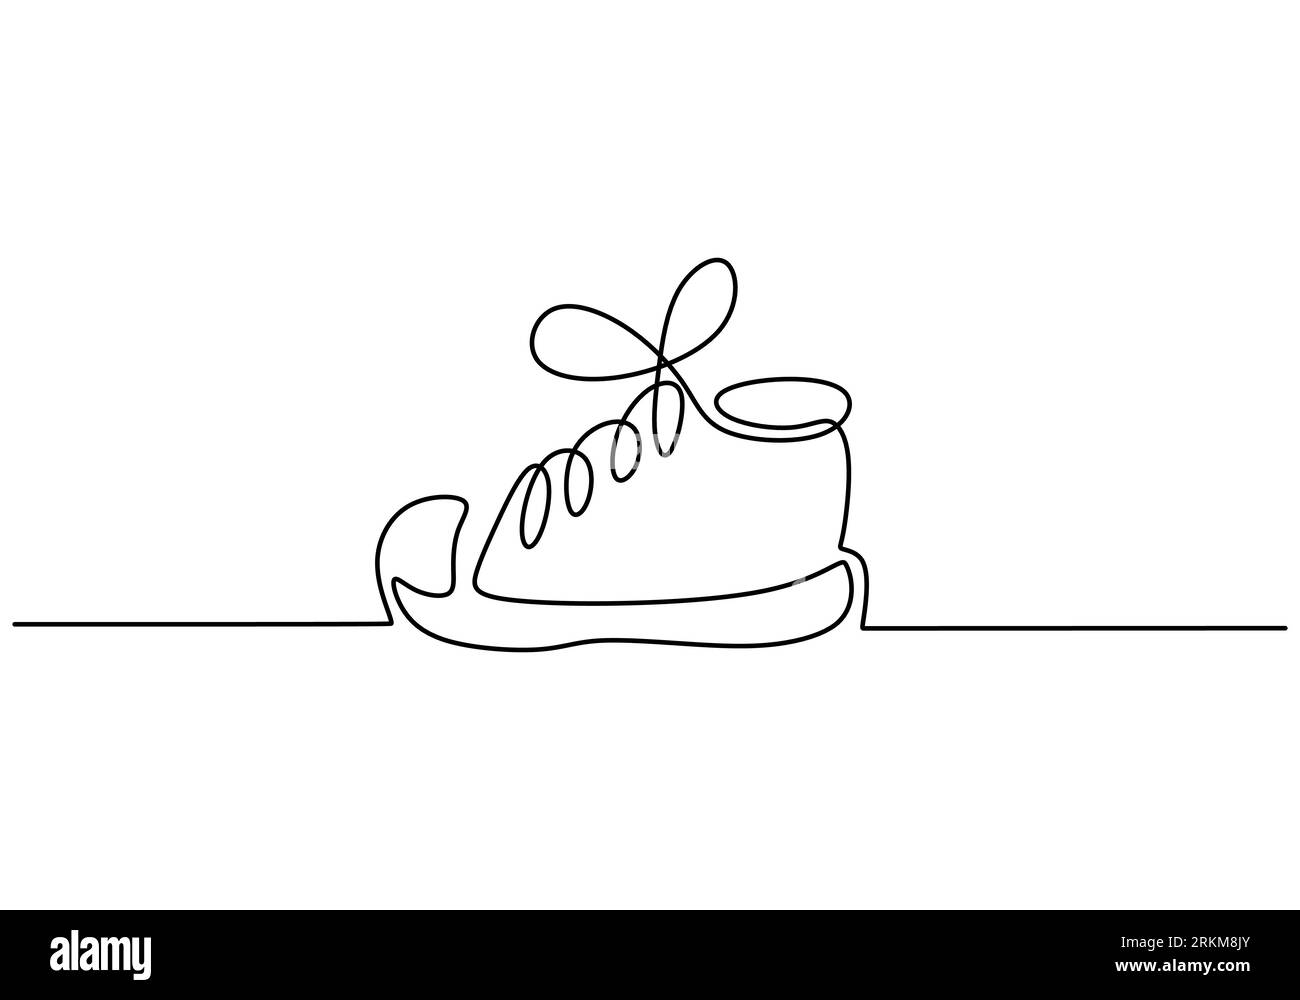 Continuous one line of a pair of one shoes isolated on white background. For children or kids theme. Stock Vector